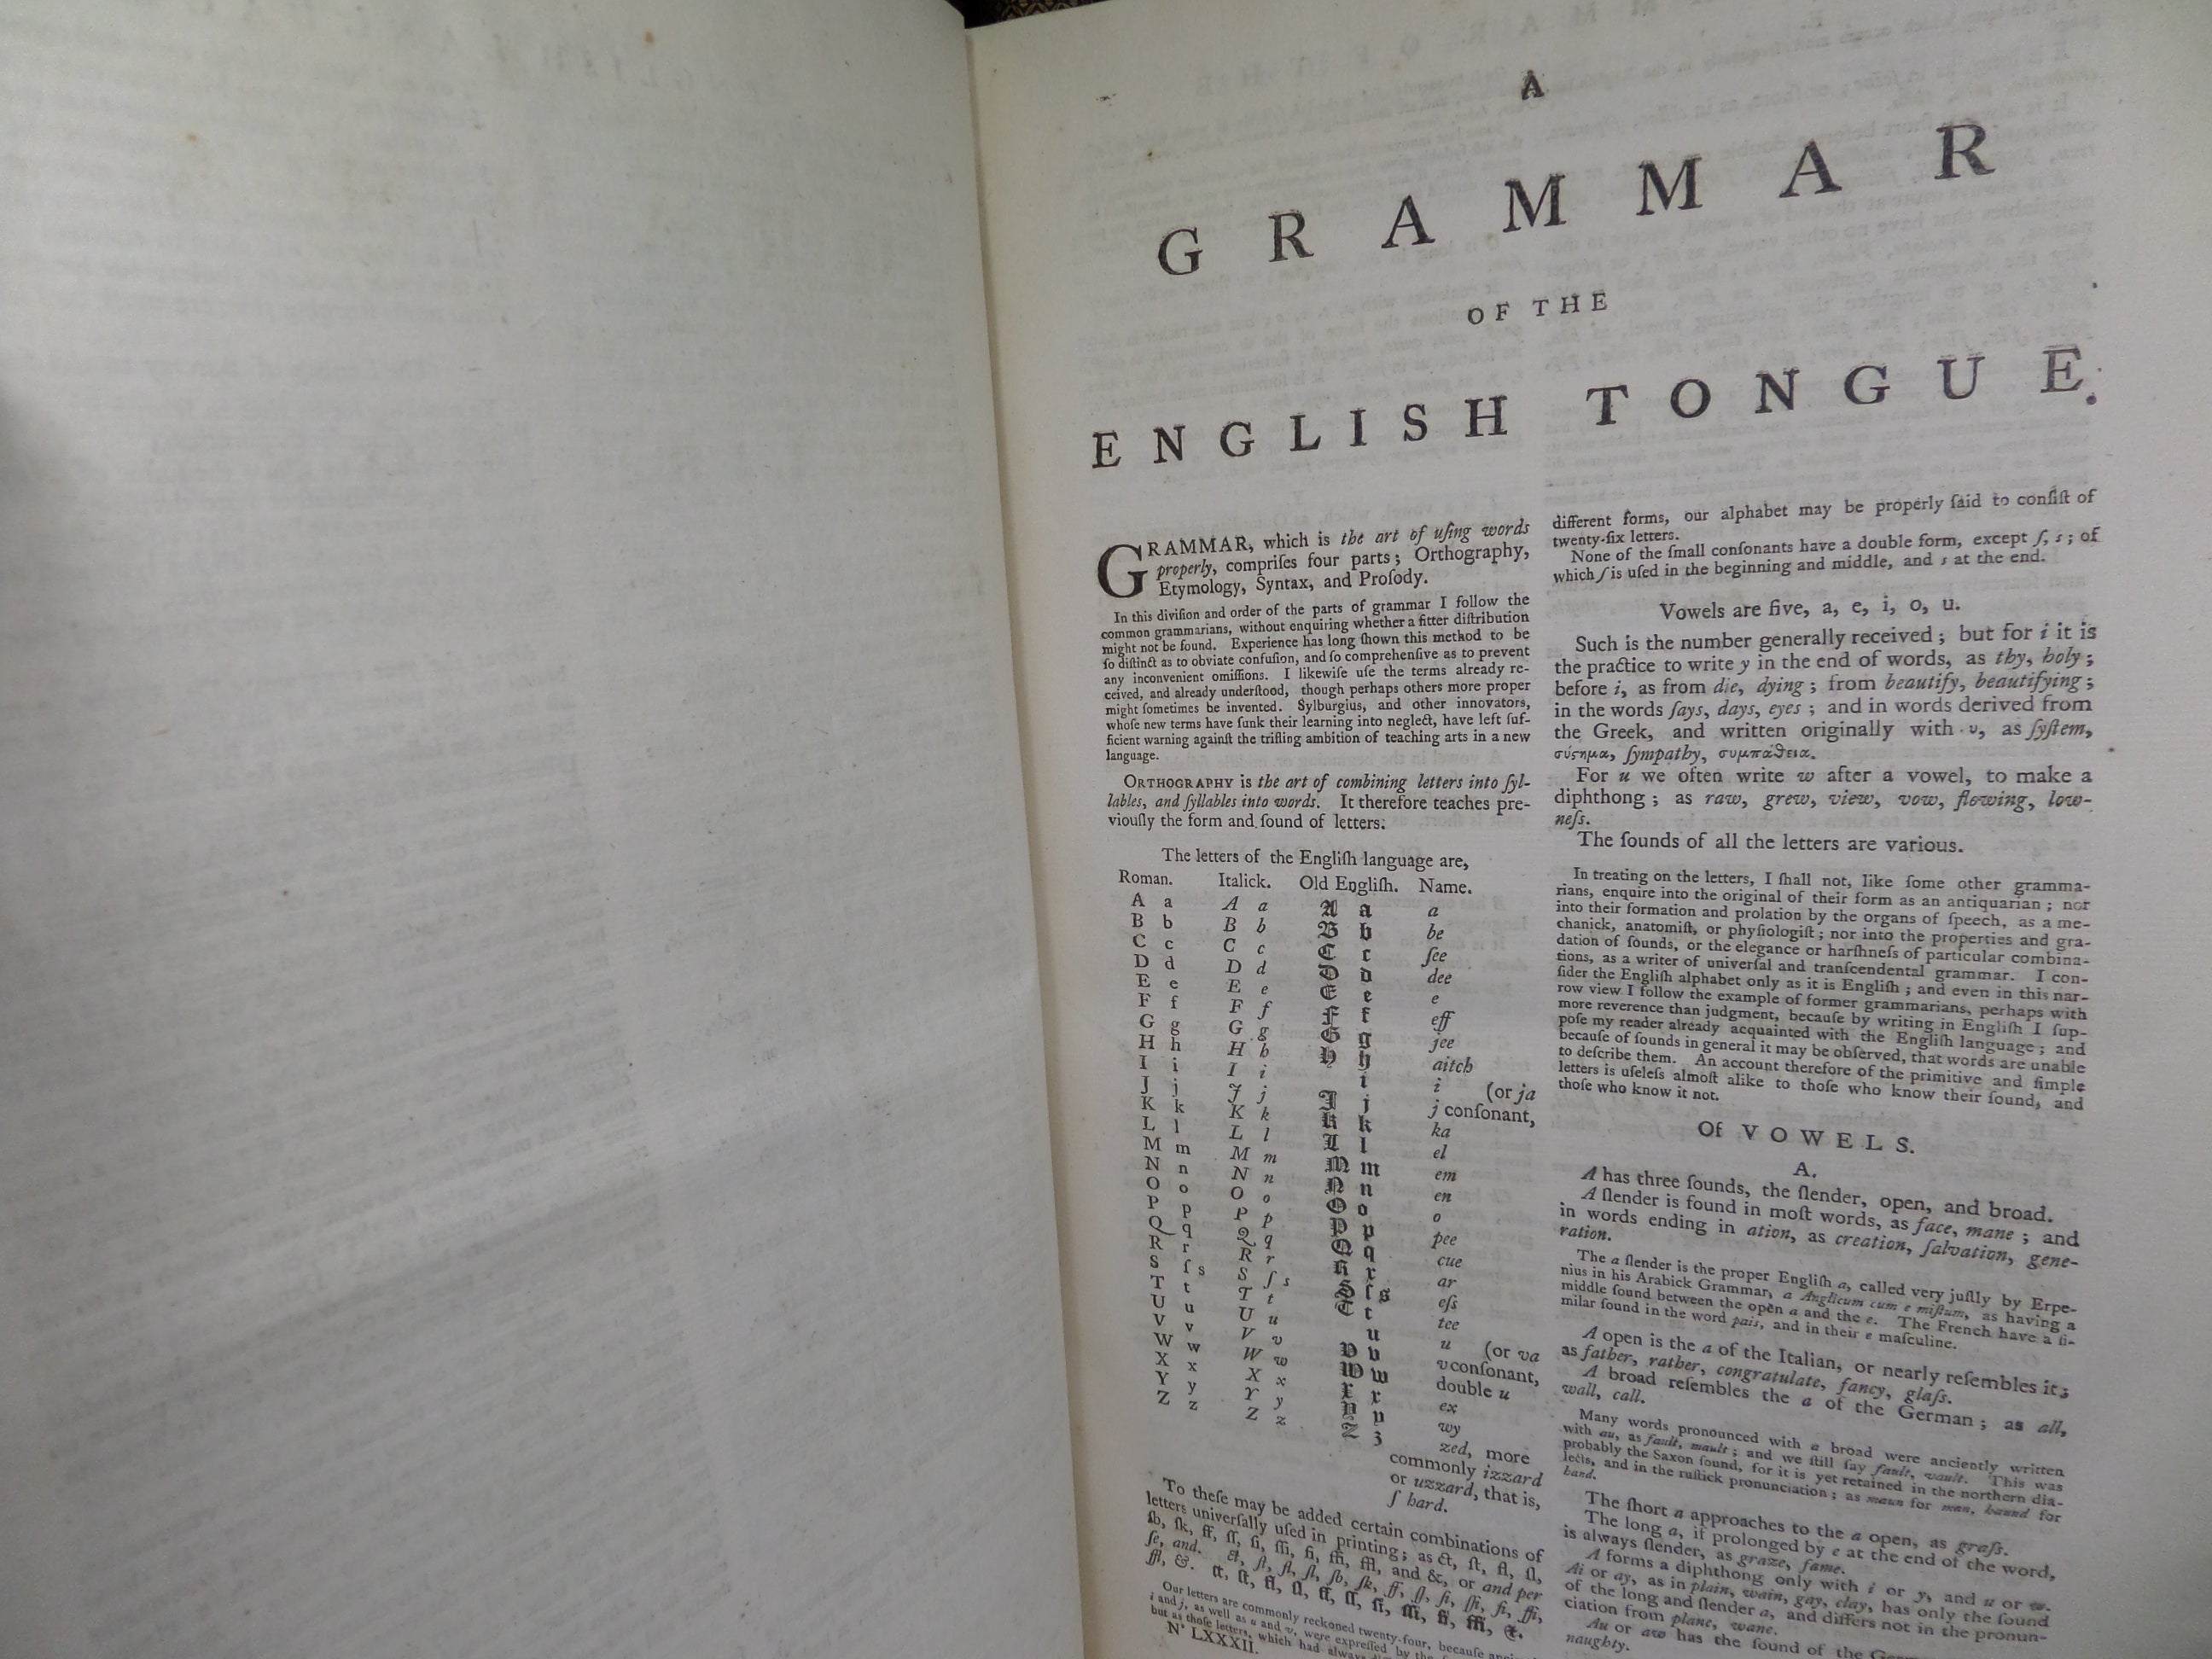 A DICTIONARY OF THE ENGLISH LANGUAGE BY SAMUEL JOHNSON 1755-1756 SECOND EDITION IN TWO VOLUMES